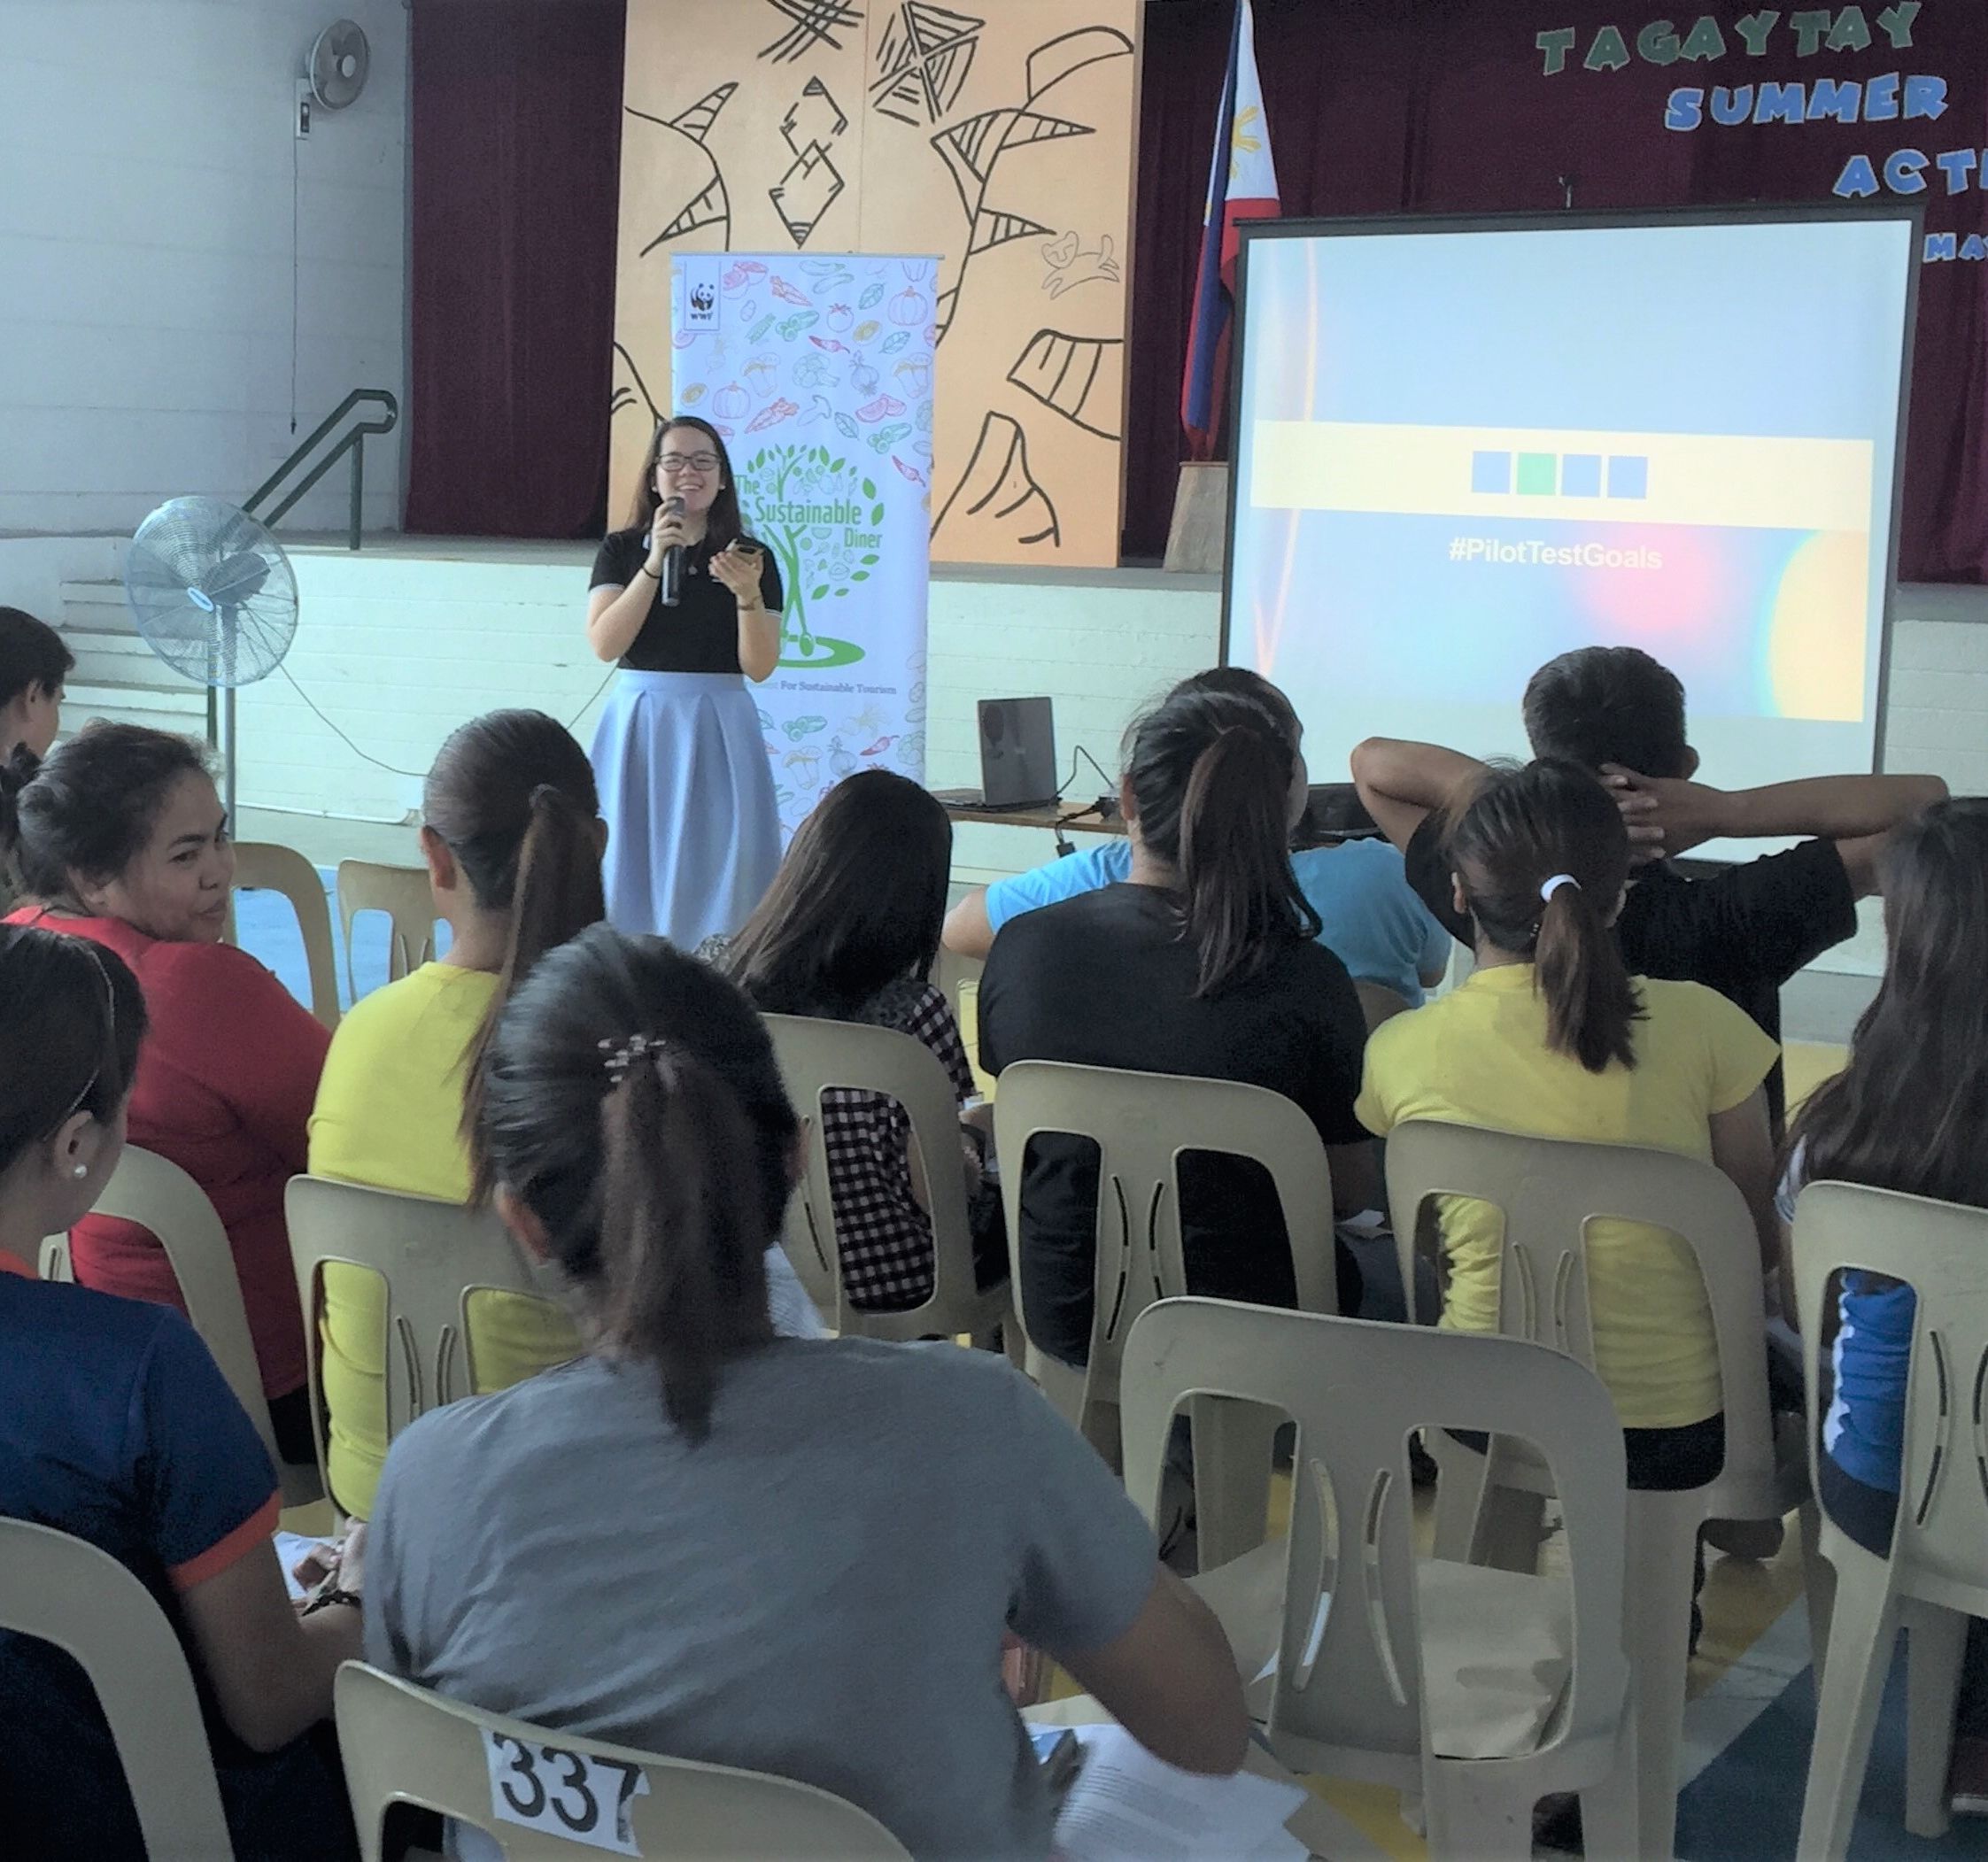 <h1>Teaching Manual Pilot Test Trainings</h1>
<p>The Sustainable Diner: A Key Ingredient for Sustainable Tourism, WWF-Philippines’ pioneer project on sustainable </p>
<p style="text-align: right;"><a href="https://support.wwf.org.ph/what-we-do/food/thesustainablediner/environmental-teaching-manual-pilot-tests/">Read More &gt;</a></p>